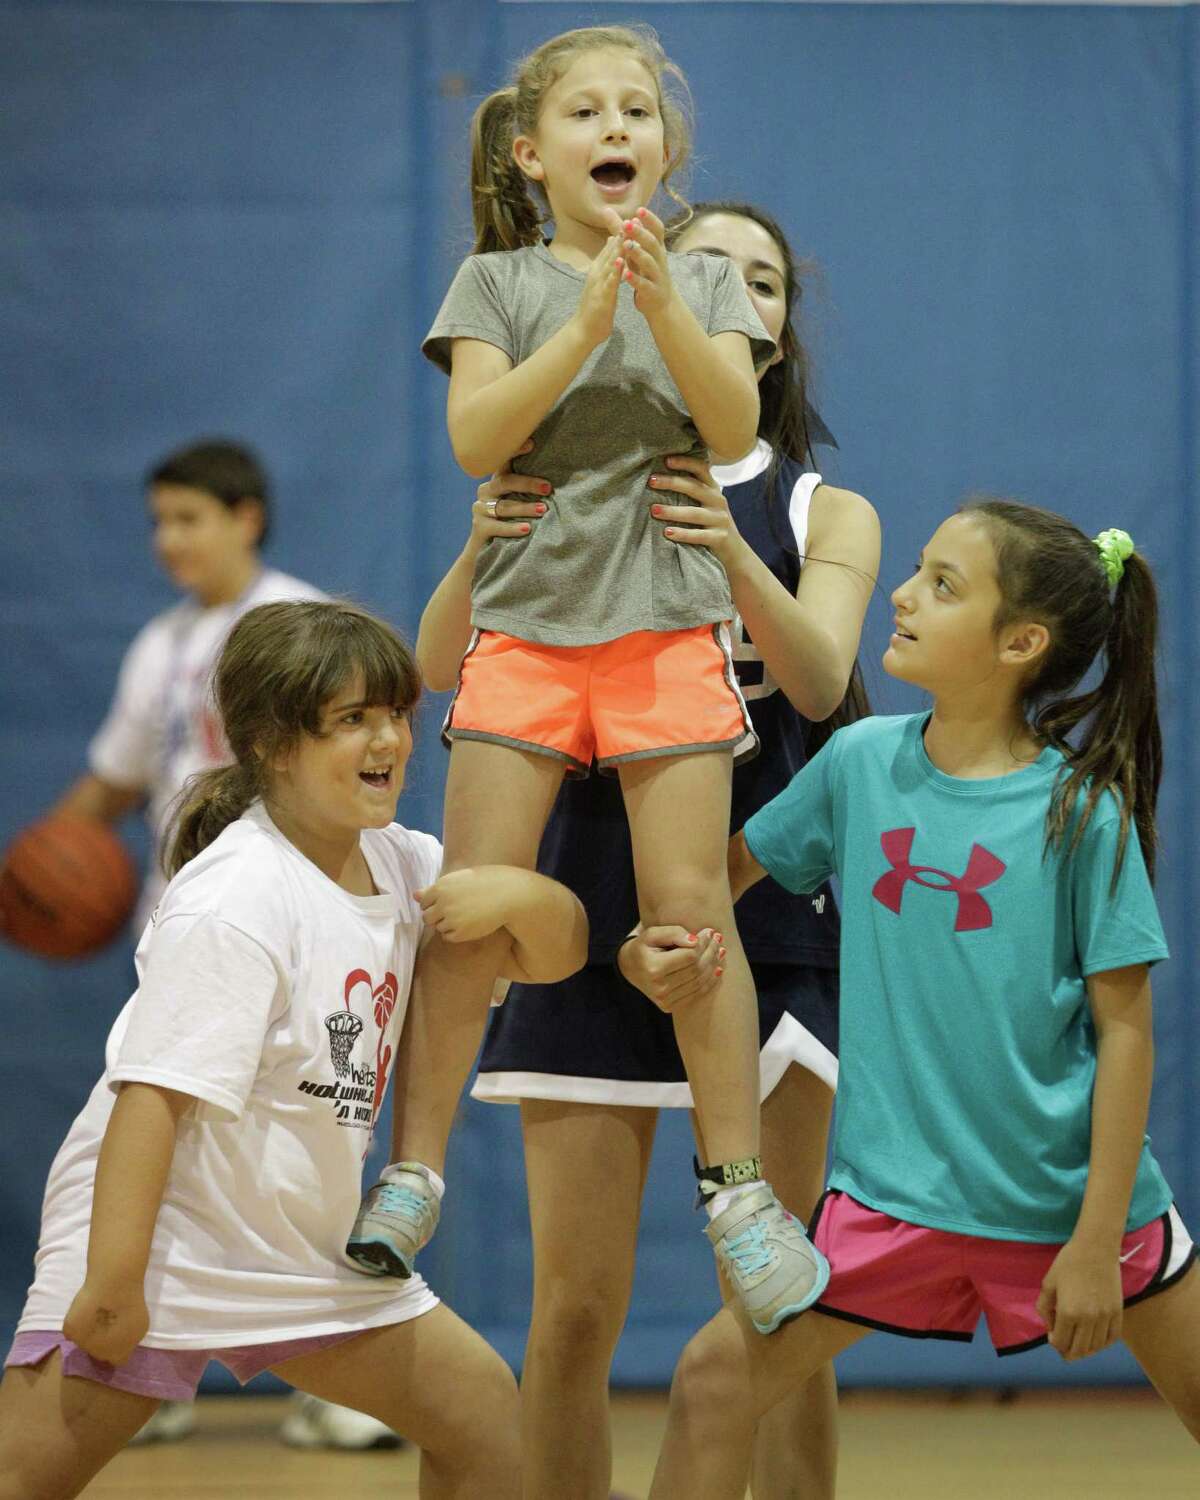 Willa Berry, center, leads a cheer as she is supported by Molly Horowitz, 16, Sara Rozen, 7, left, and Maya Levy, 10, right, during the tournament.